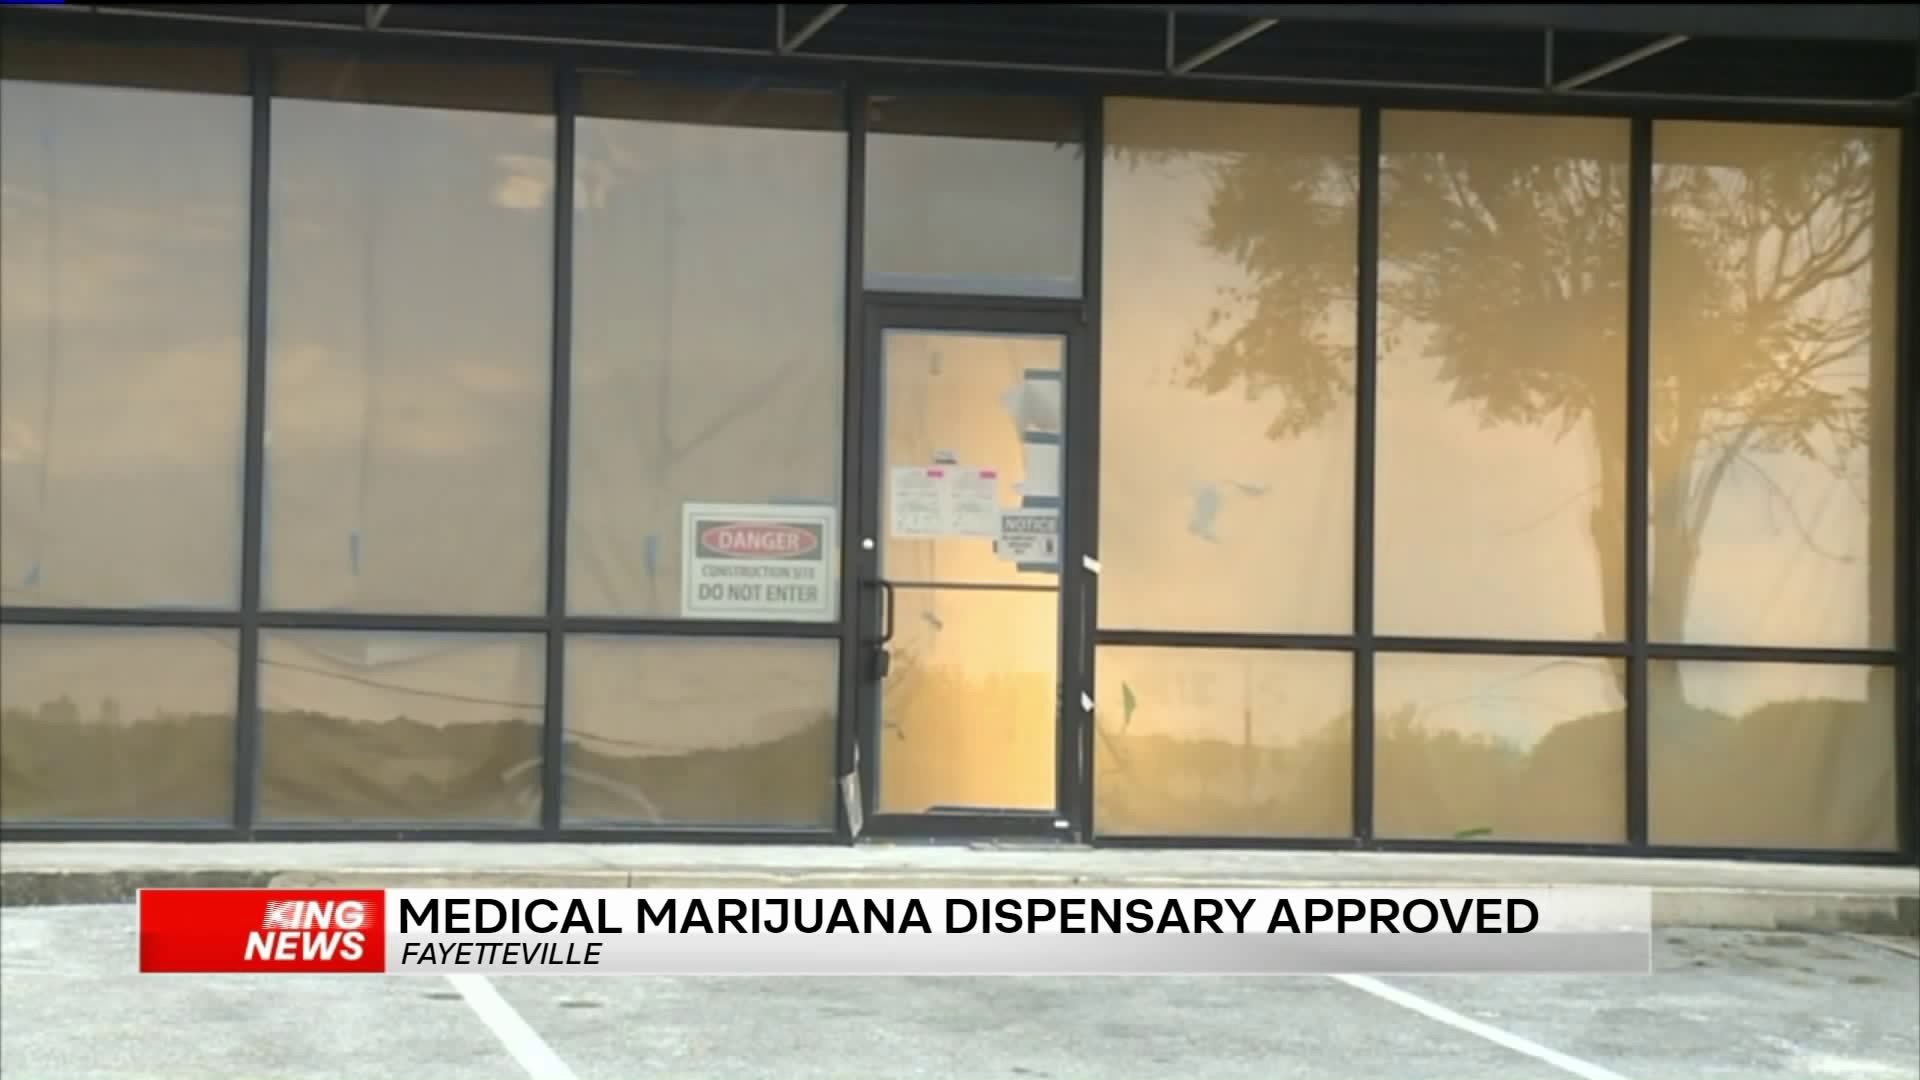 Fayetteville Medical Marijuana Dispensary Approved to Open